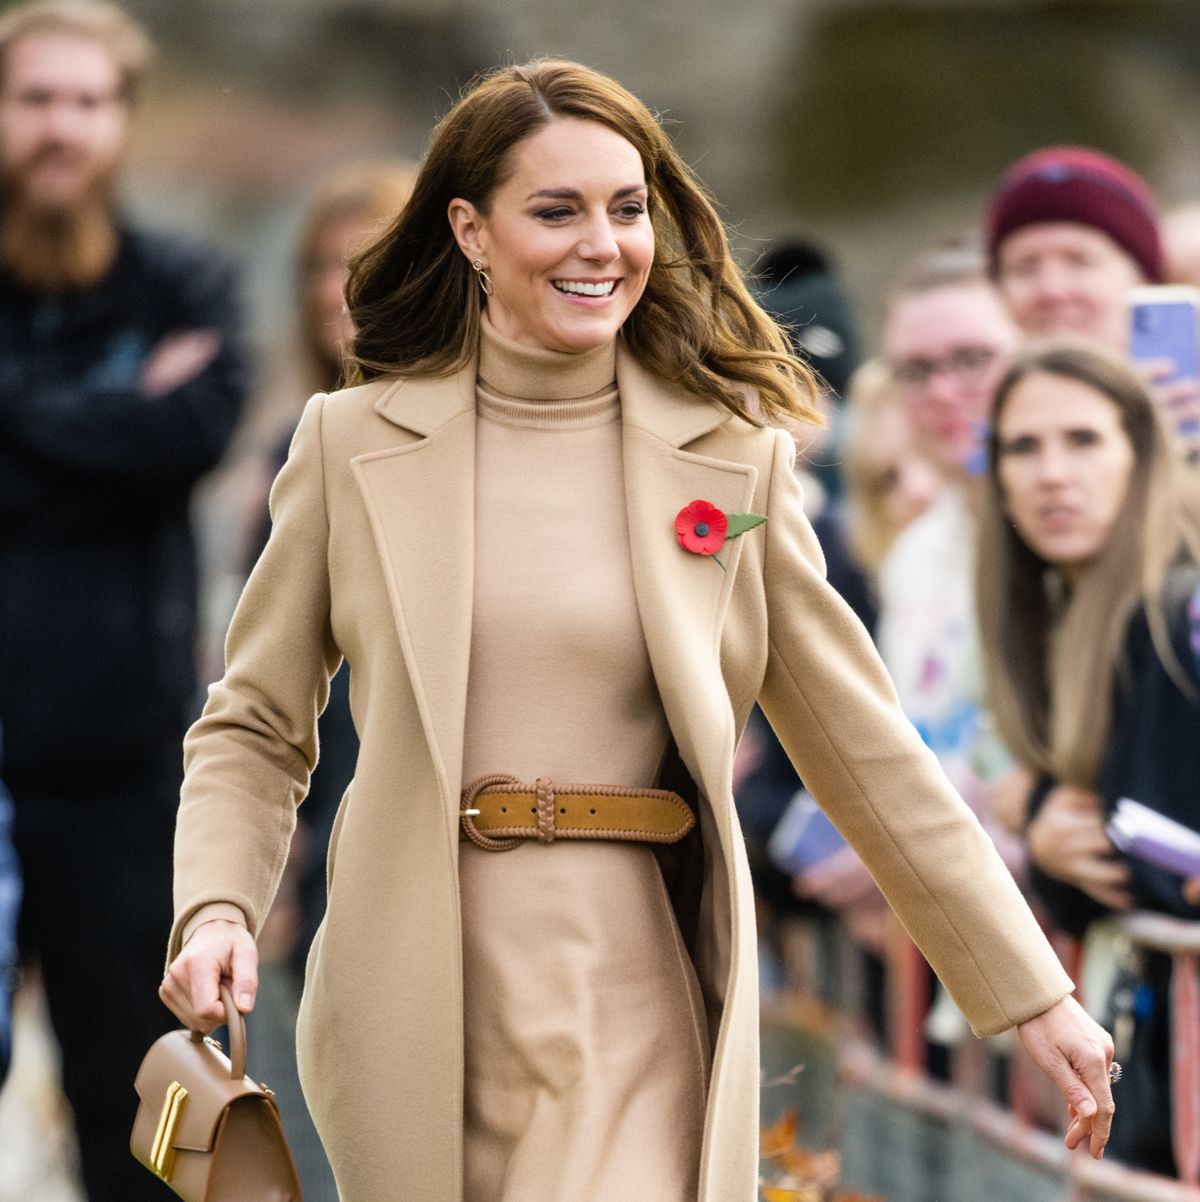 straf Artifact dechifrere Kate Middleton Wears Monochrome Camel Outfit During Scarborough Engagement,  Photos